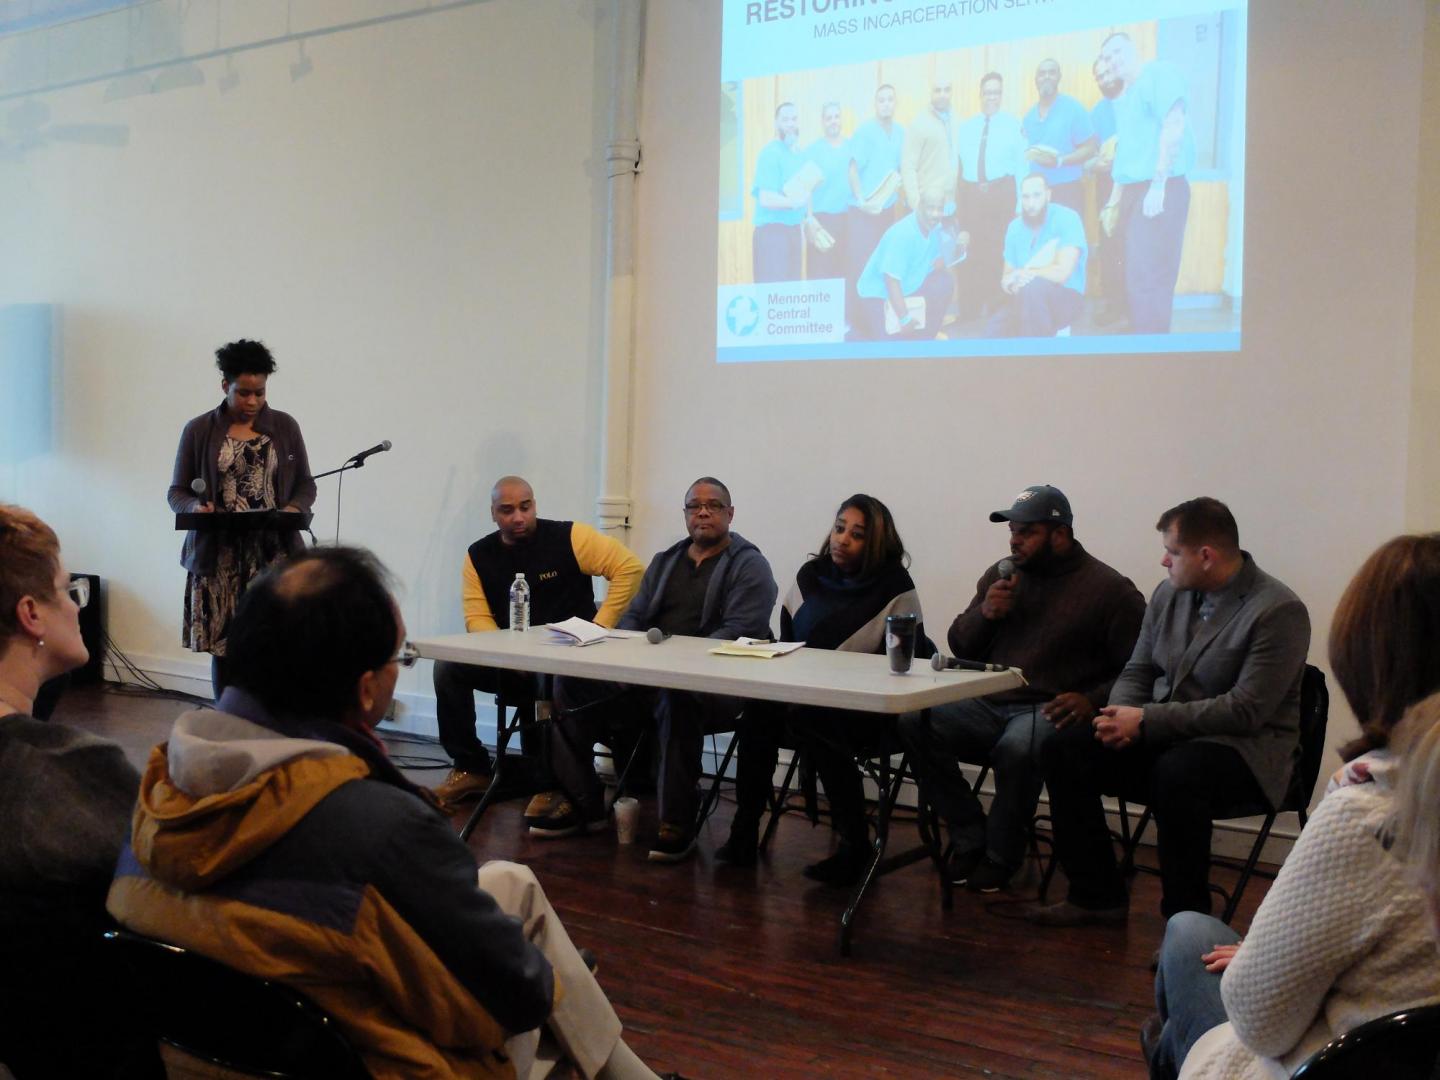 A group of 5 panelist sitting at a table speaking to a audience sitting in front of them. A woman is standing off to the left holding a microphone.